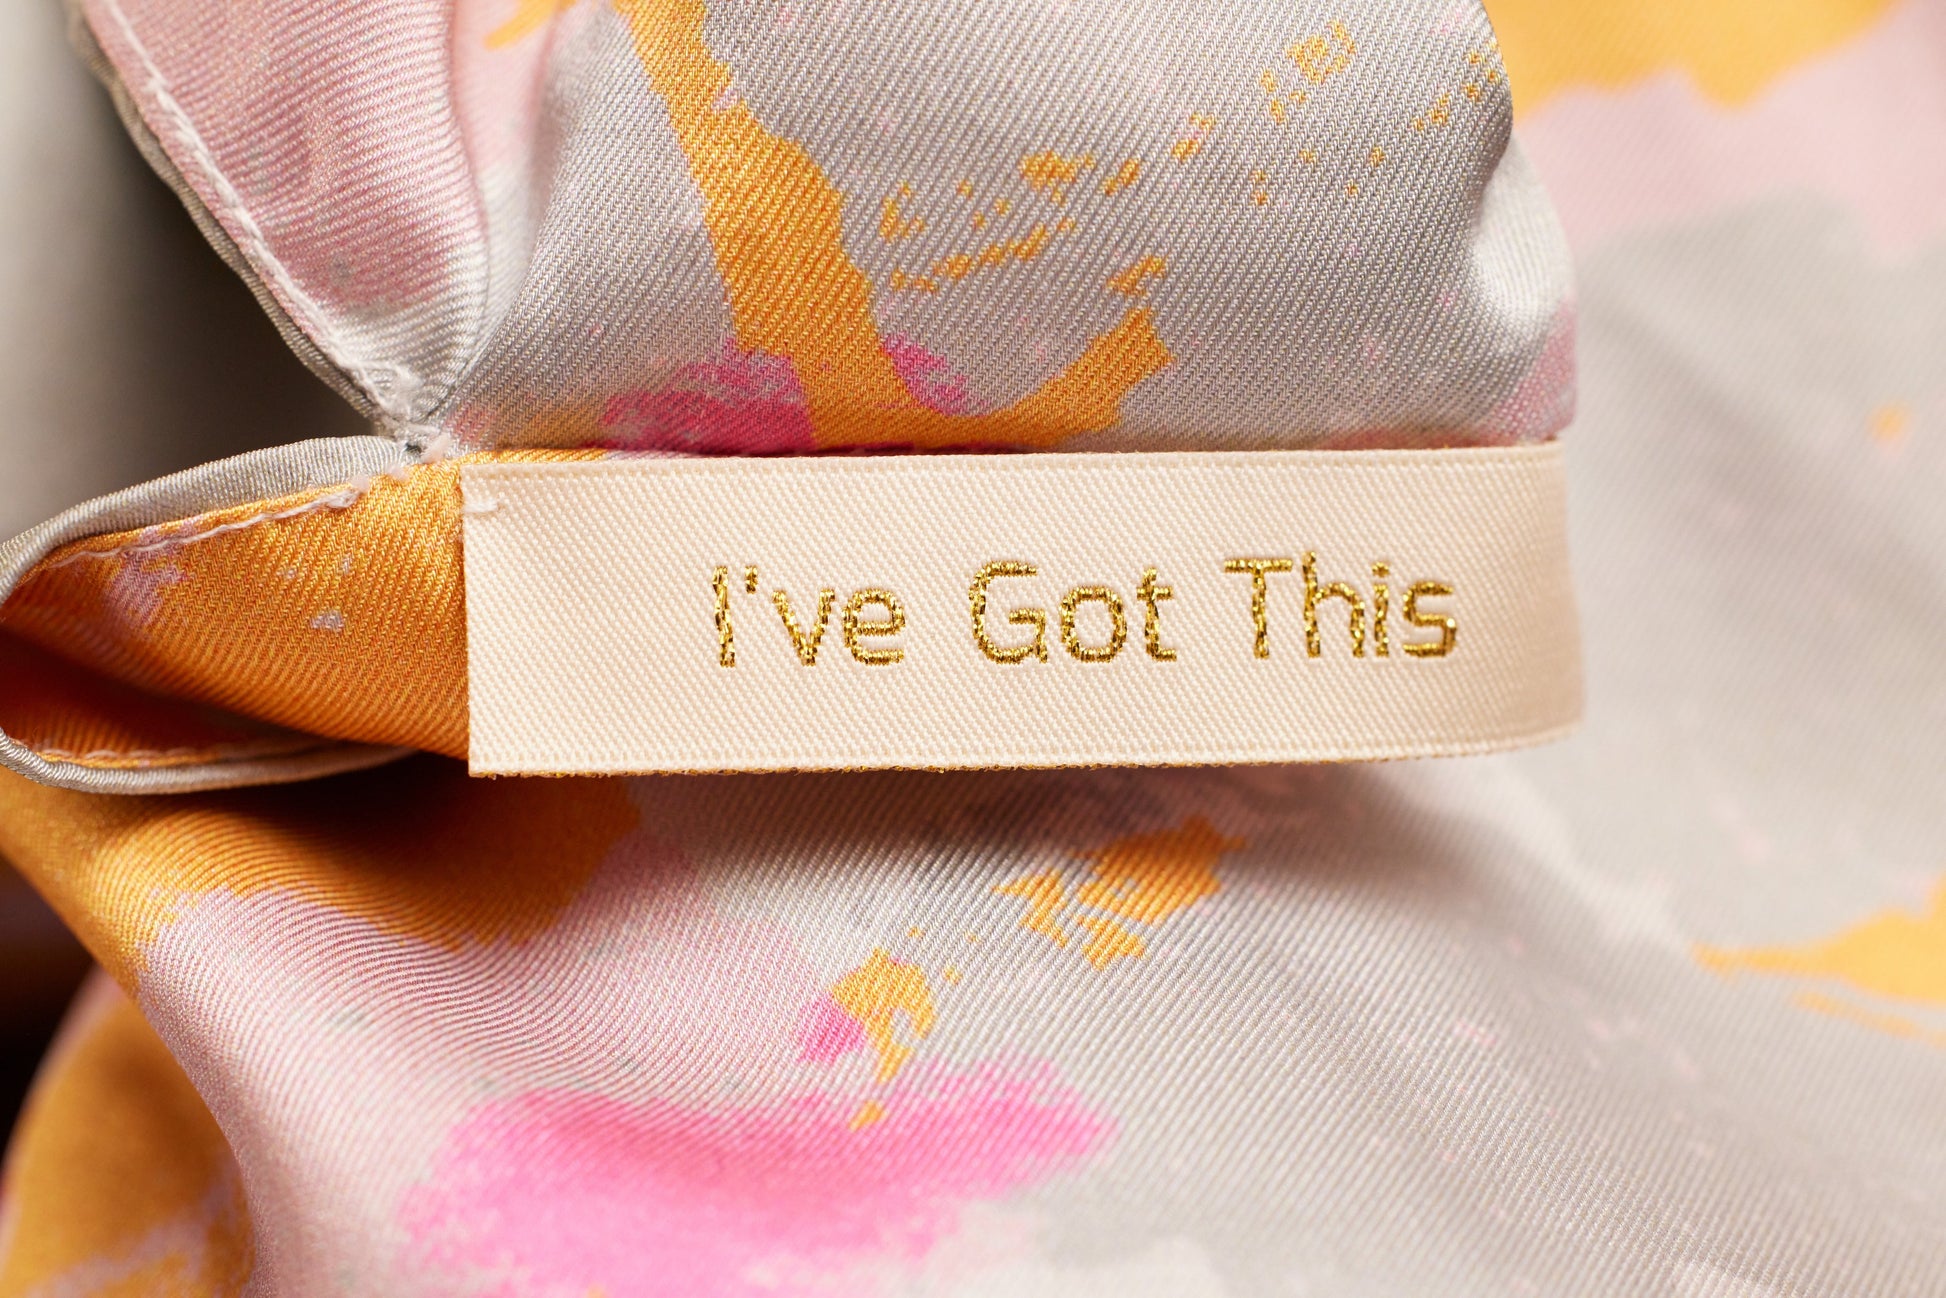 Article of clothing with a tag showing a positive affirmation